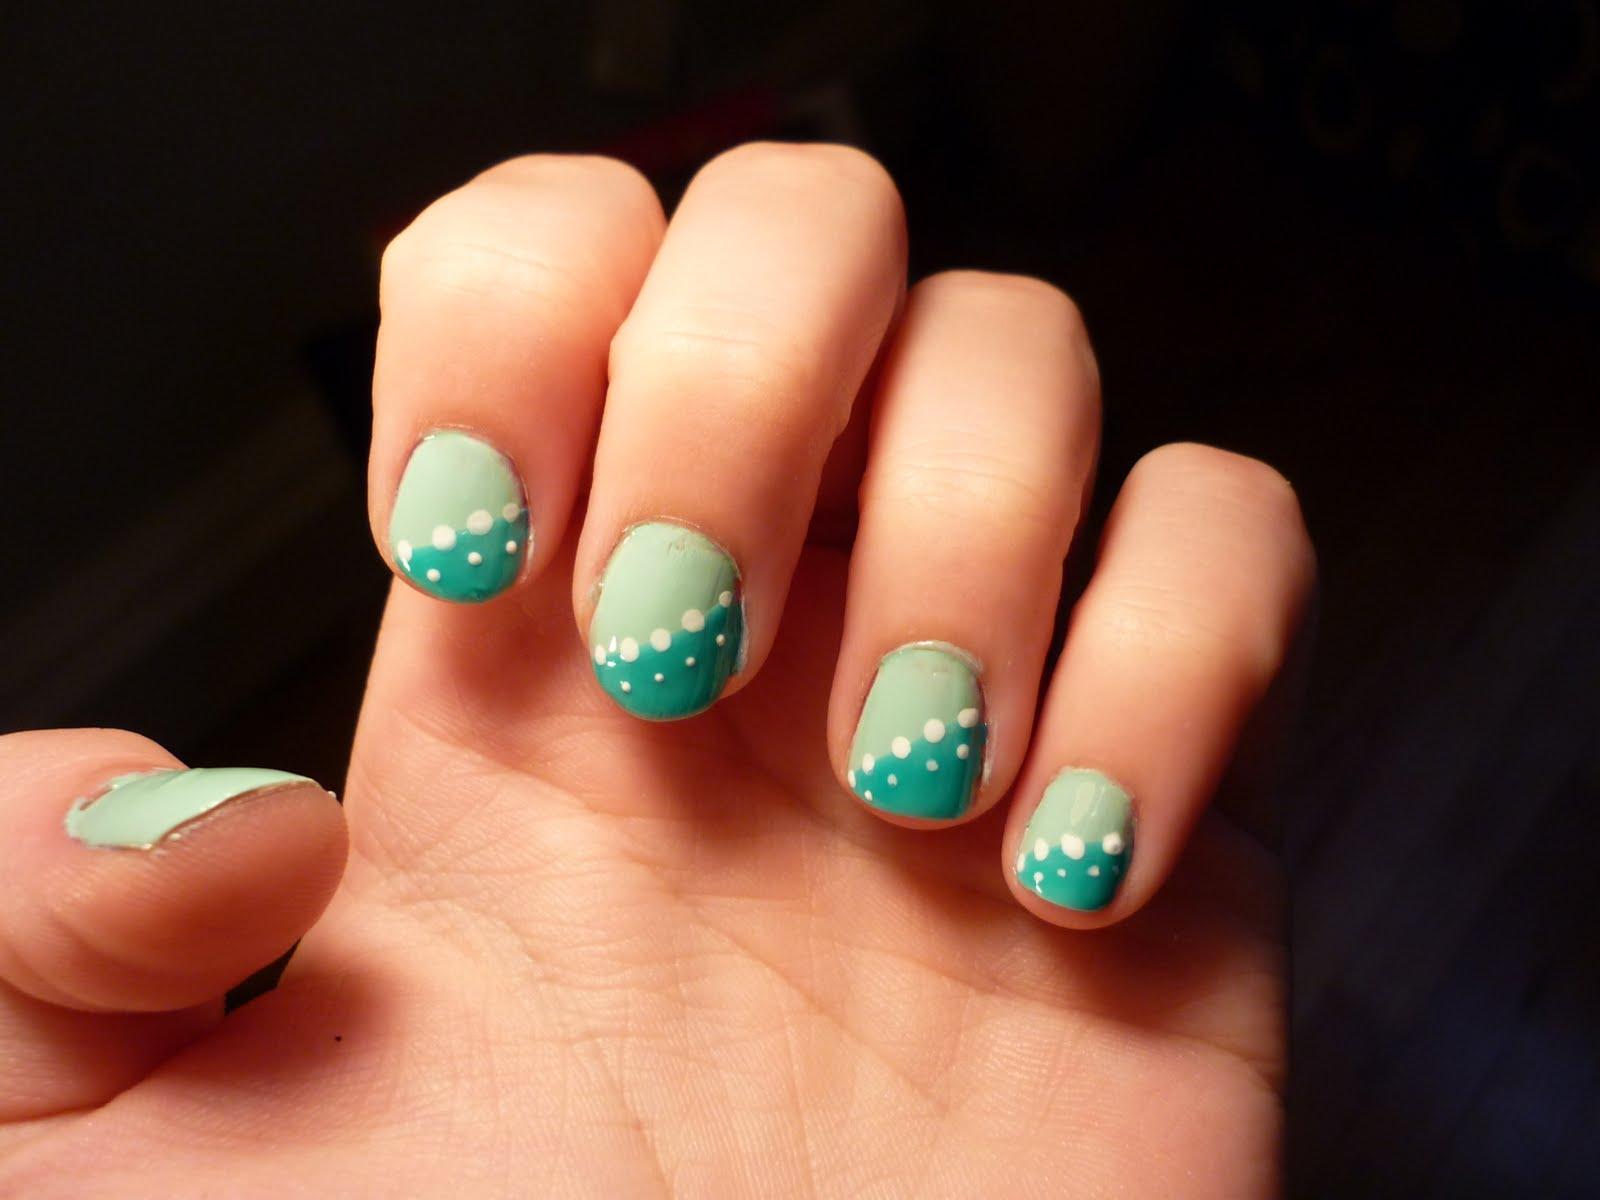 2. Easy and Adorable Nail Designs for Short Nails - wide 11